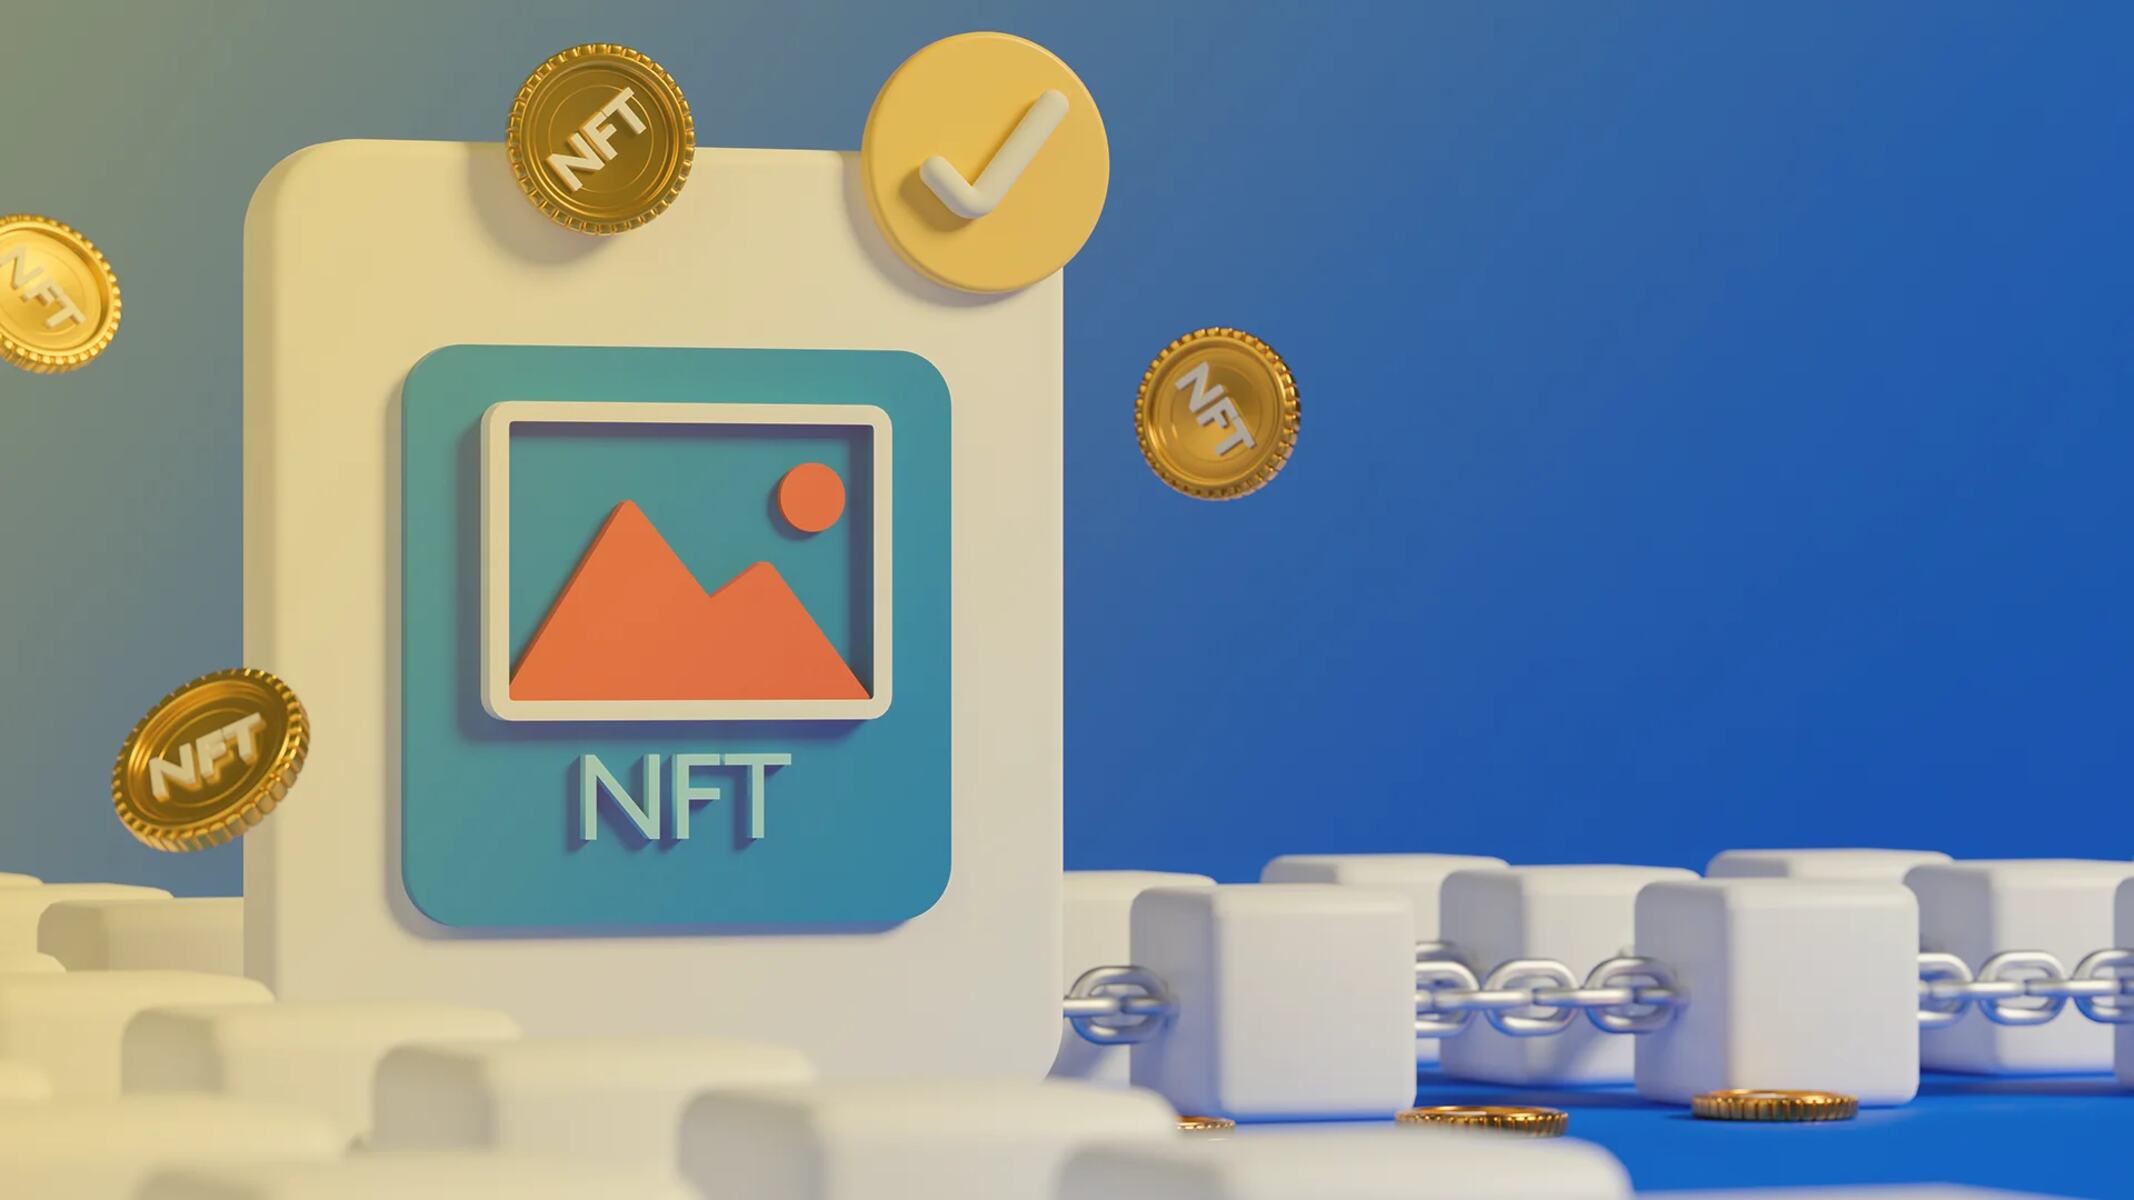 What Does Minted Mean In NFT